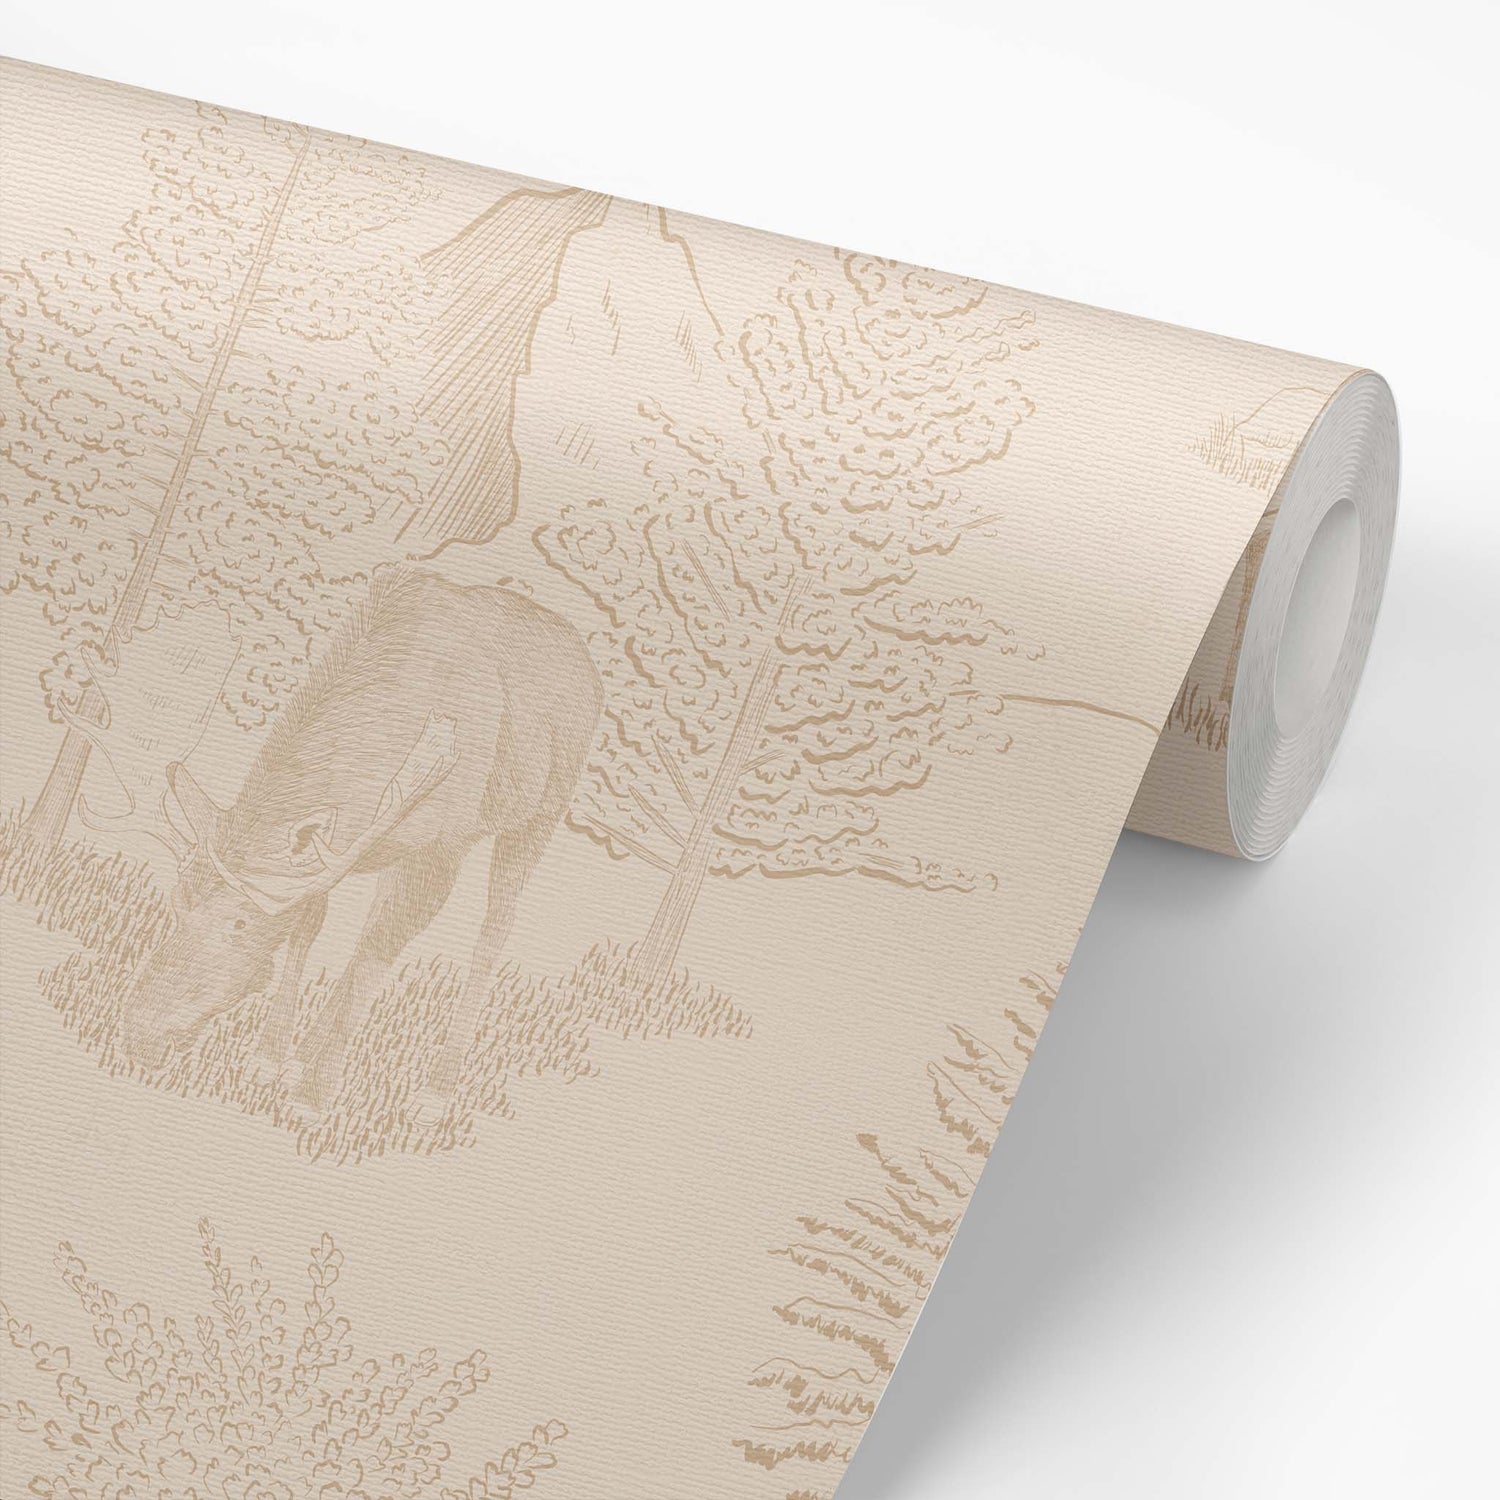 Wallpaper panel featuring Cayla Naylor Denali- Dogwood Peel and Stick Wallpaper - a nature inspired pattern